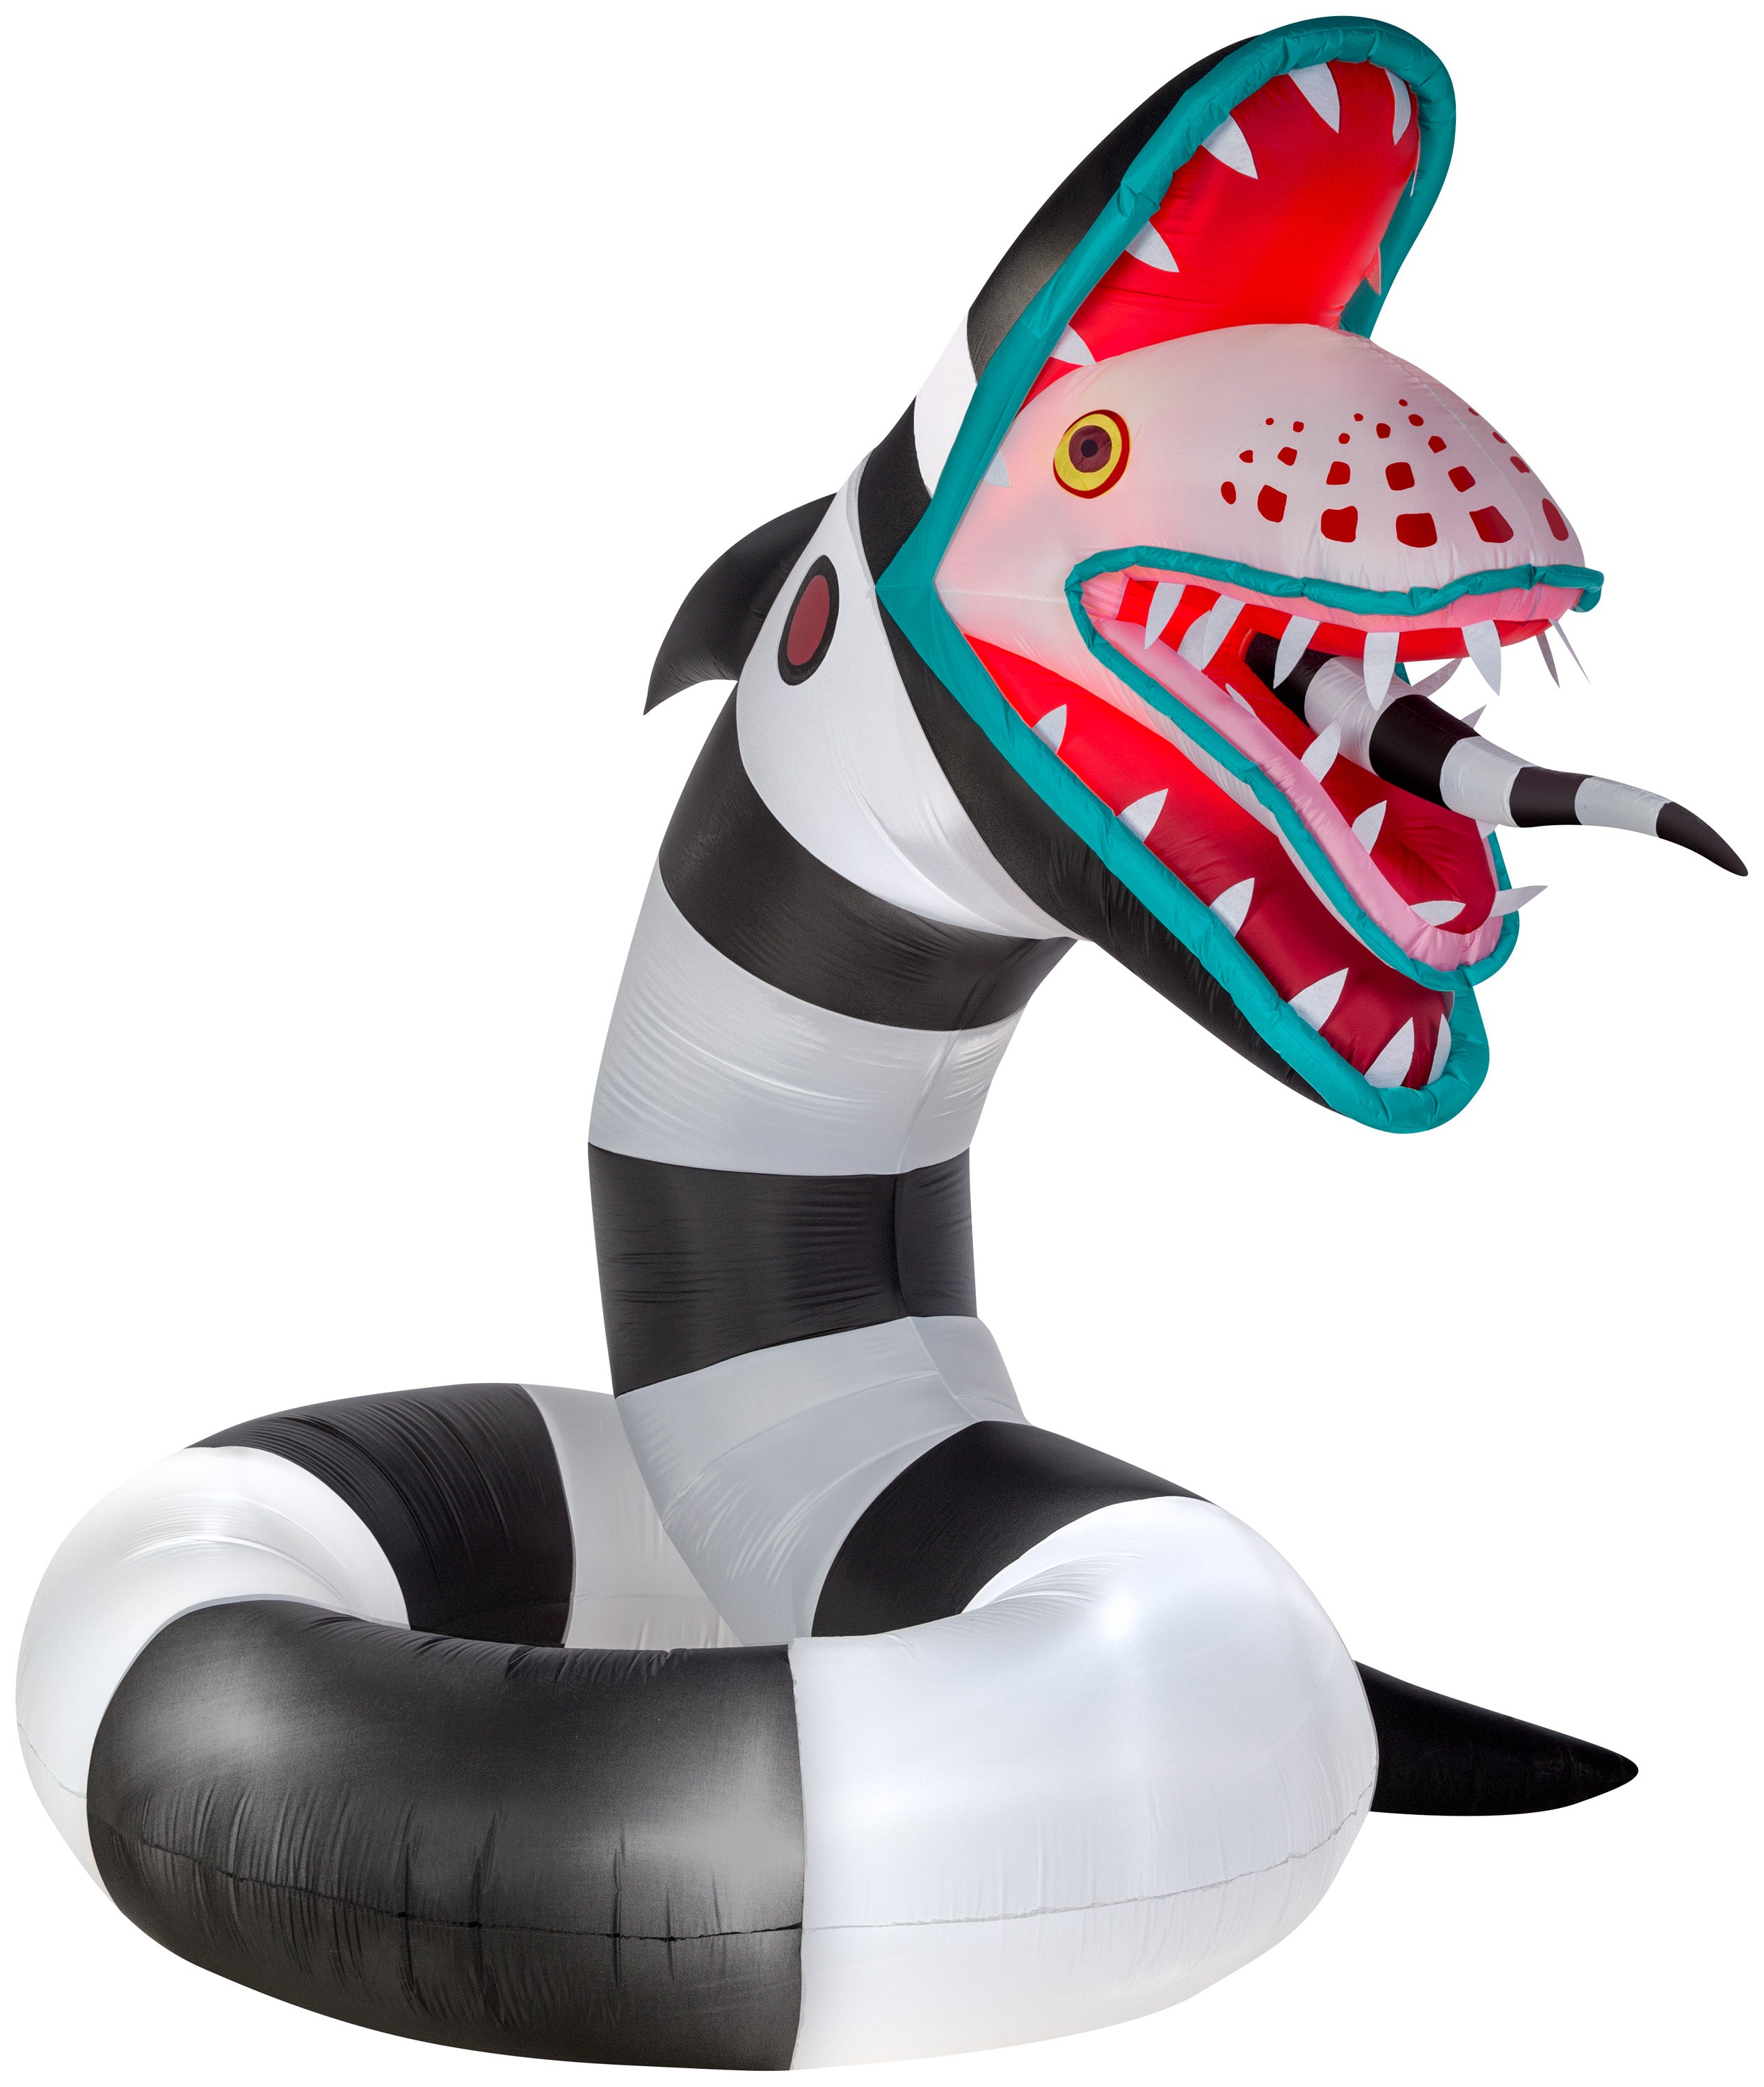 Gemmy Animated Airblown Sand Worm from Beetlejuice Giant WB, 10 ft Tall, Multicolored